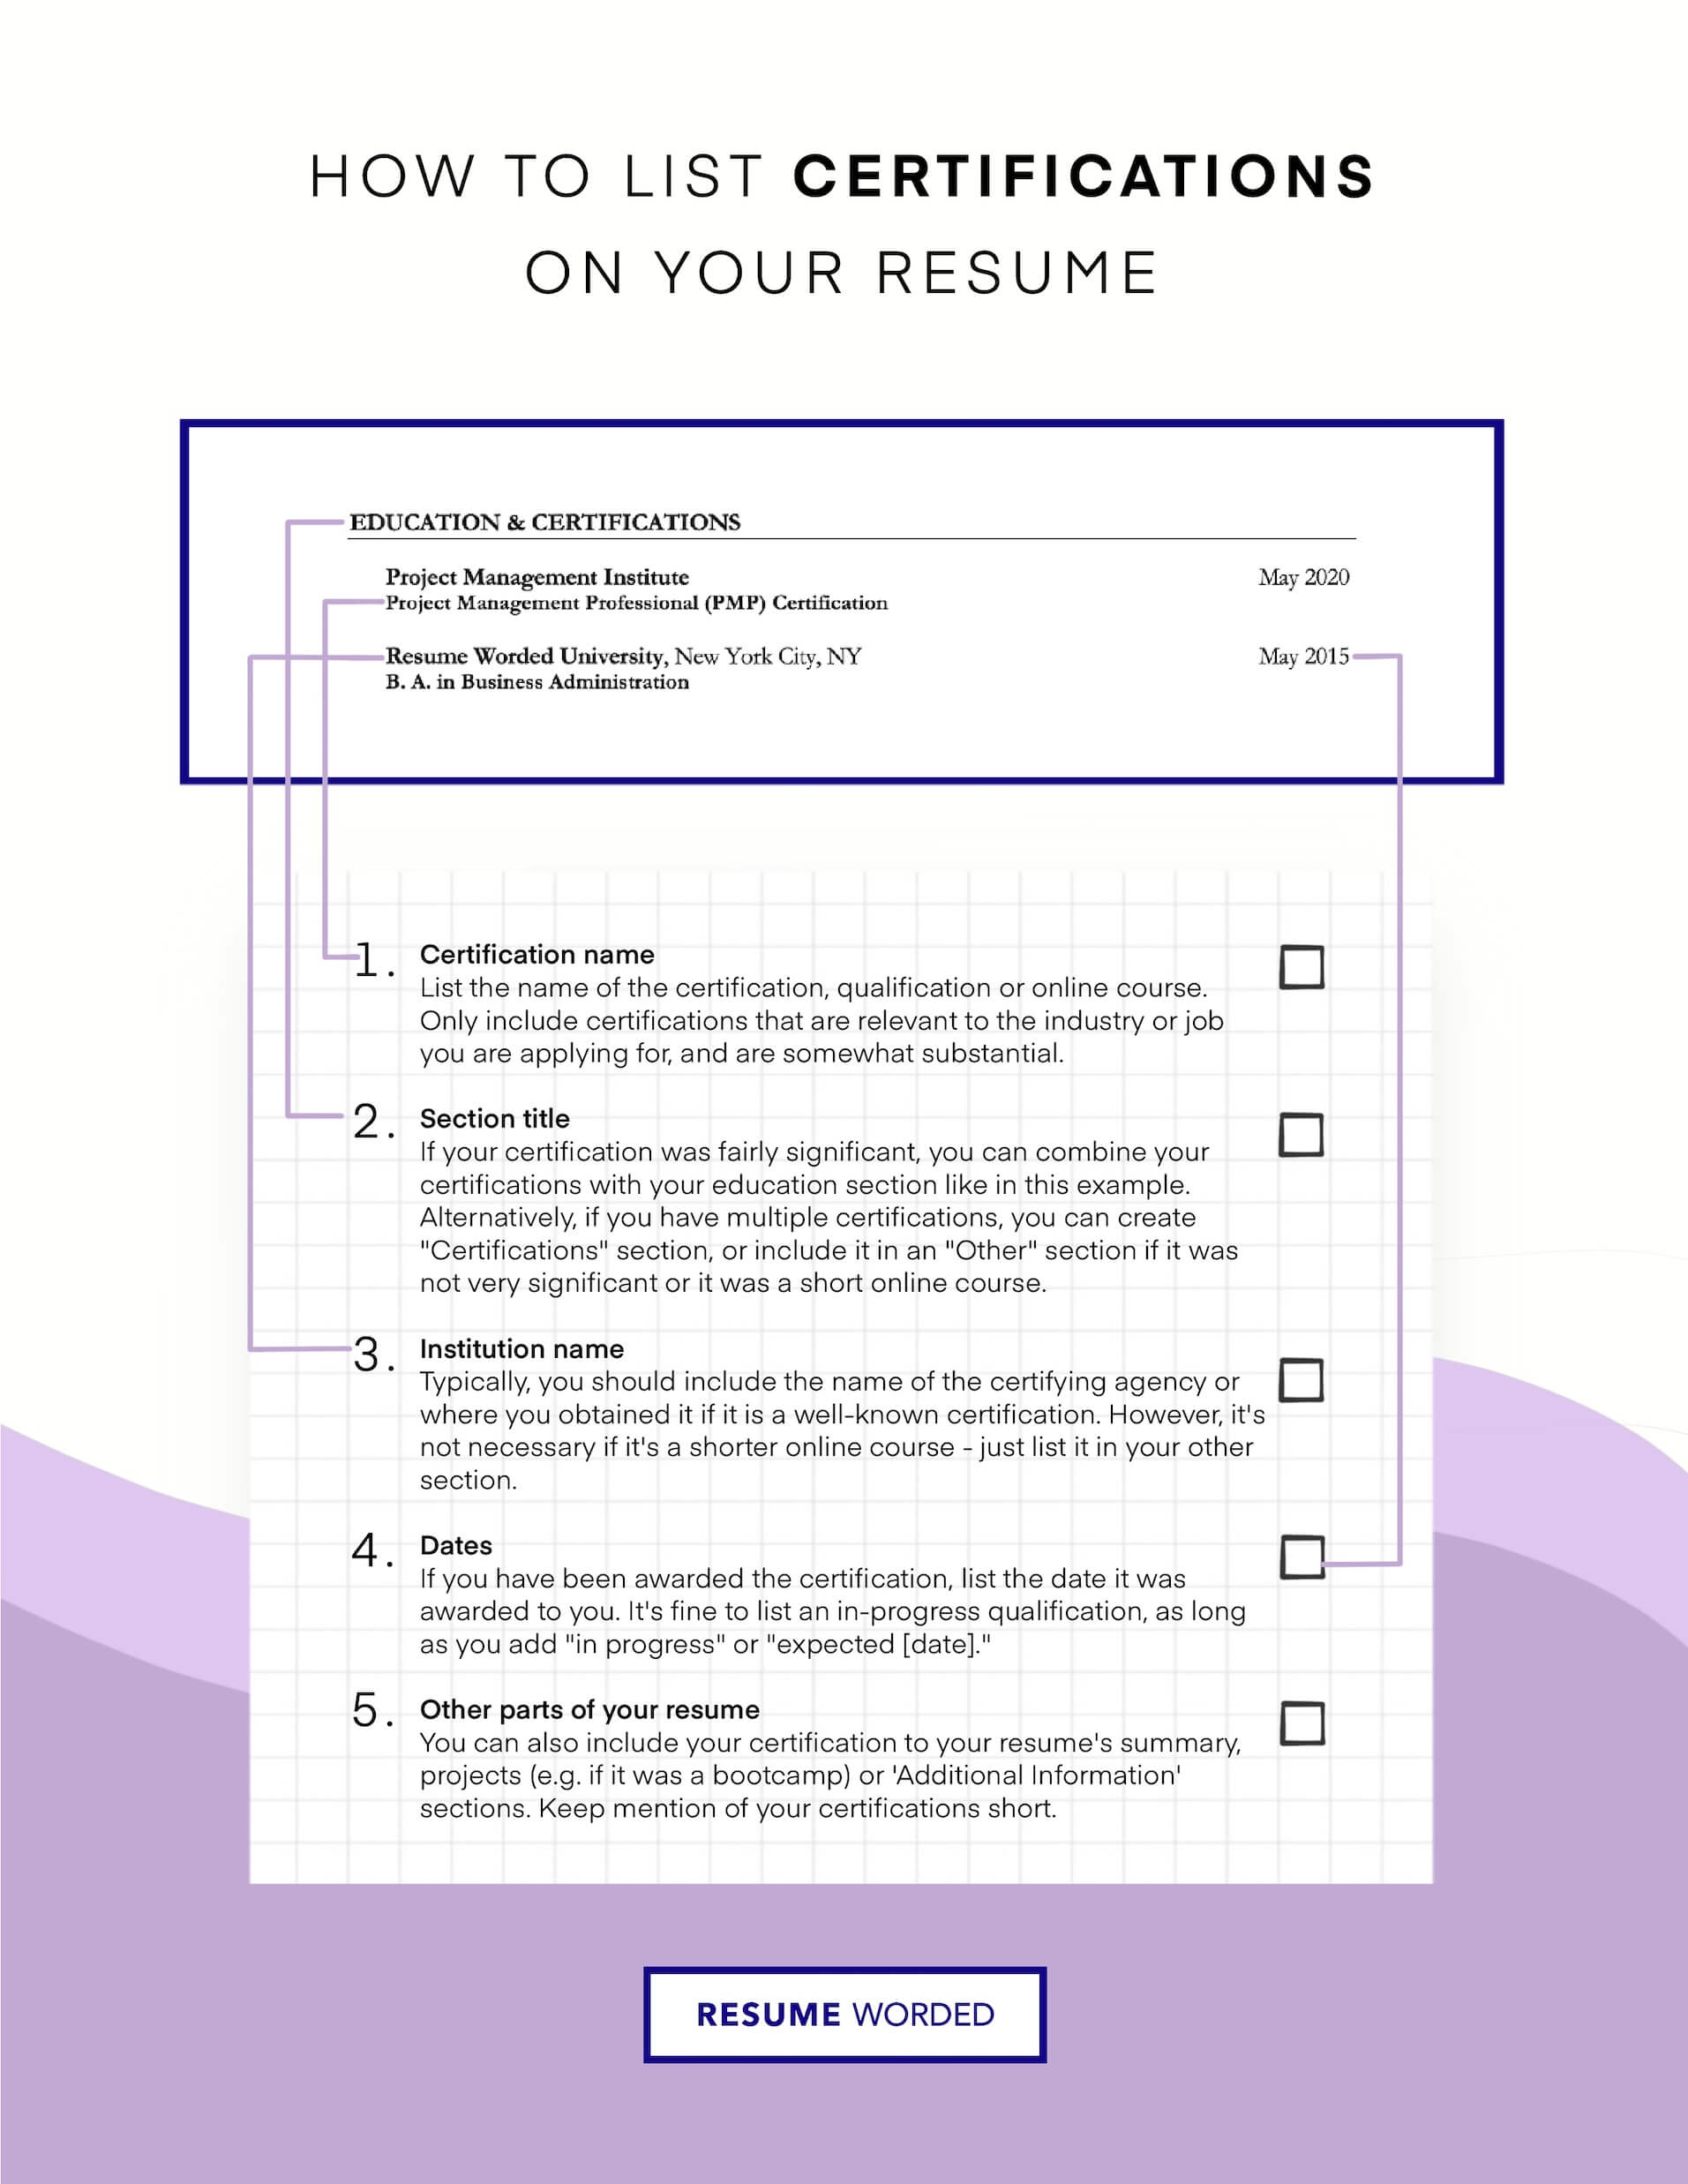 A checklist and example of how to list certifications on your resume